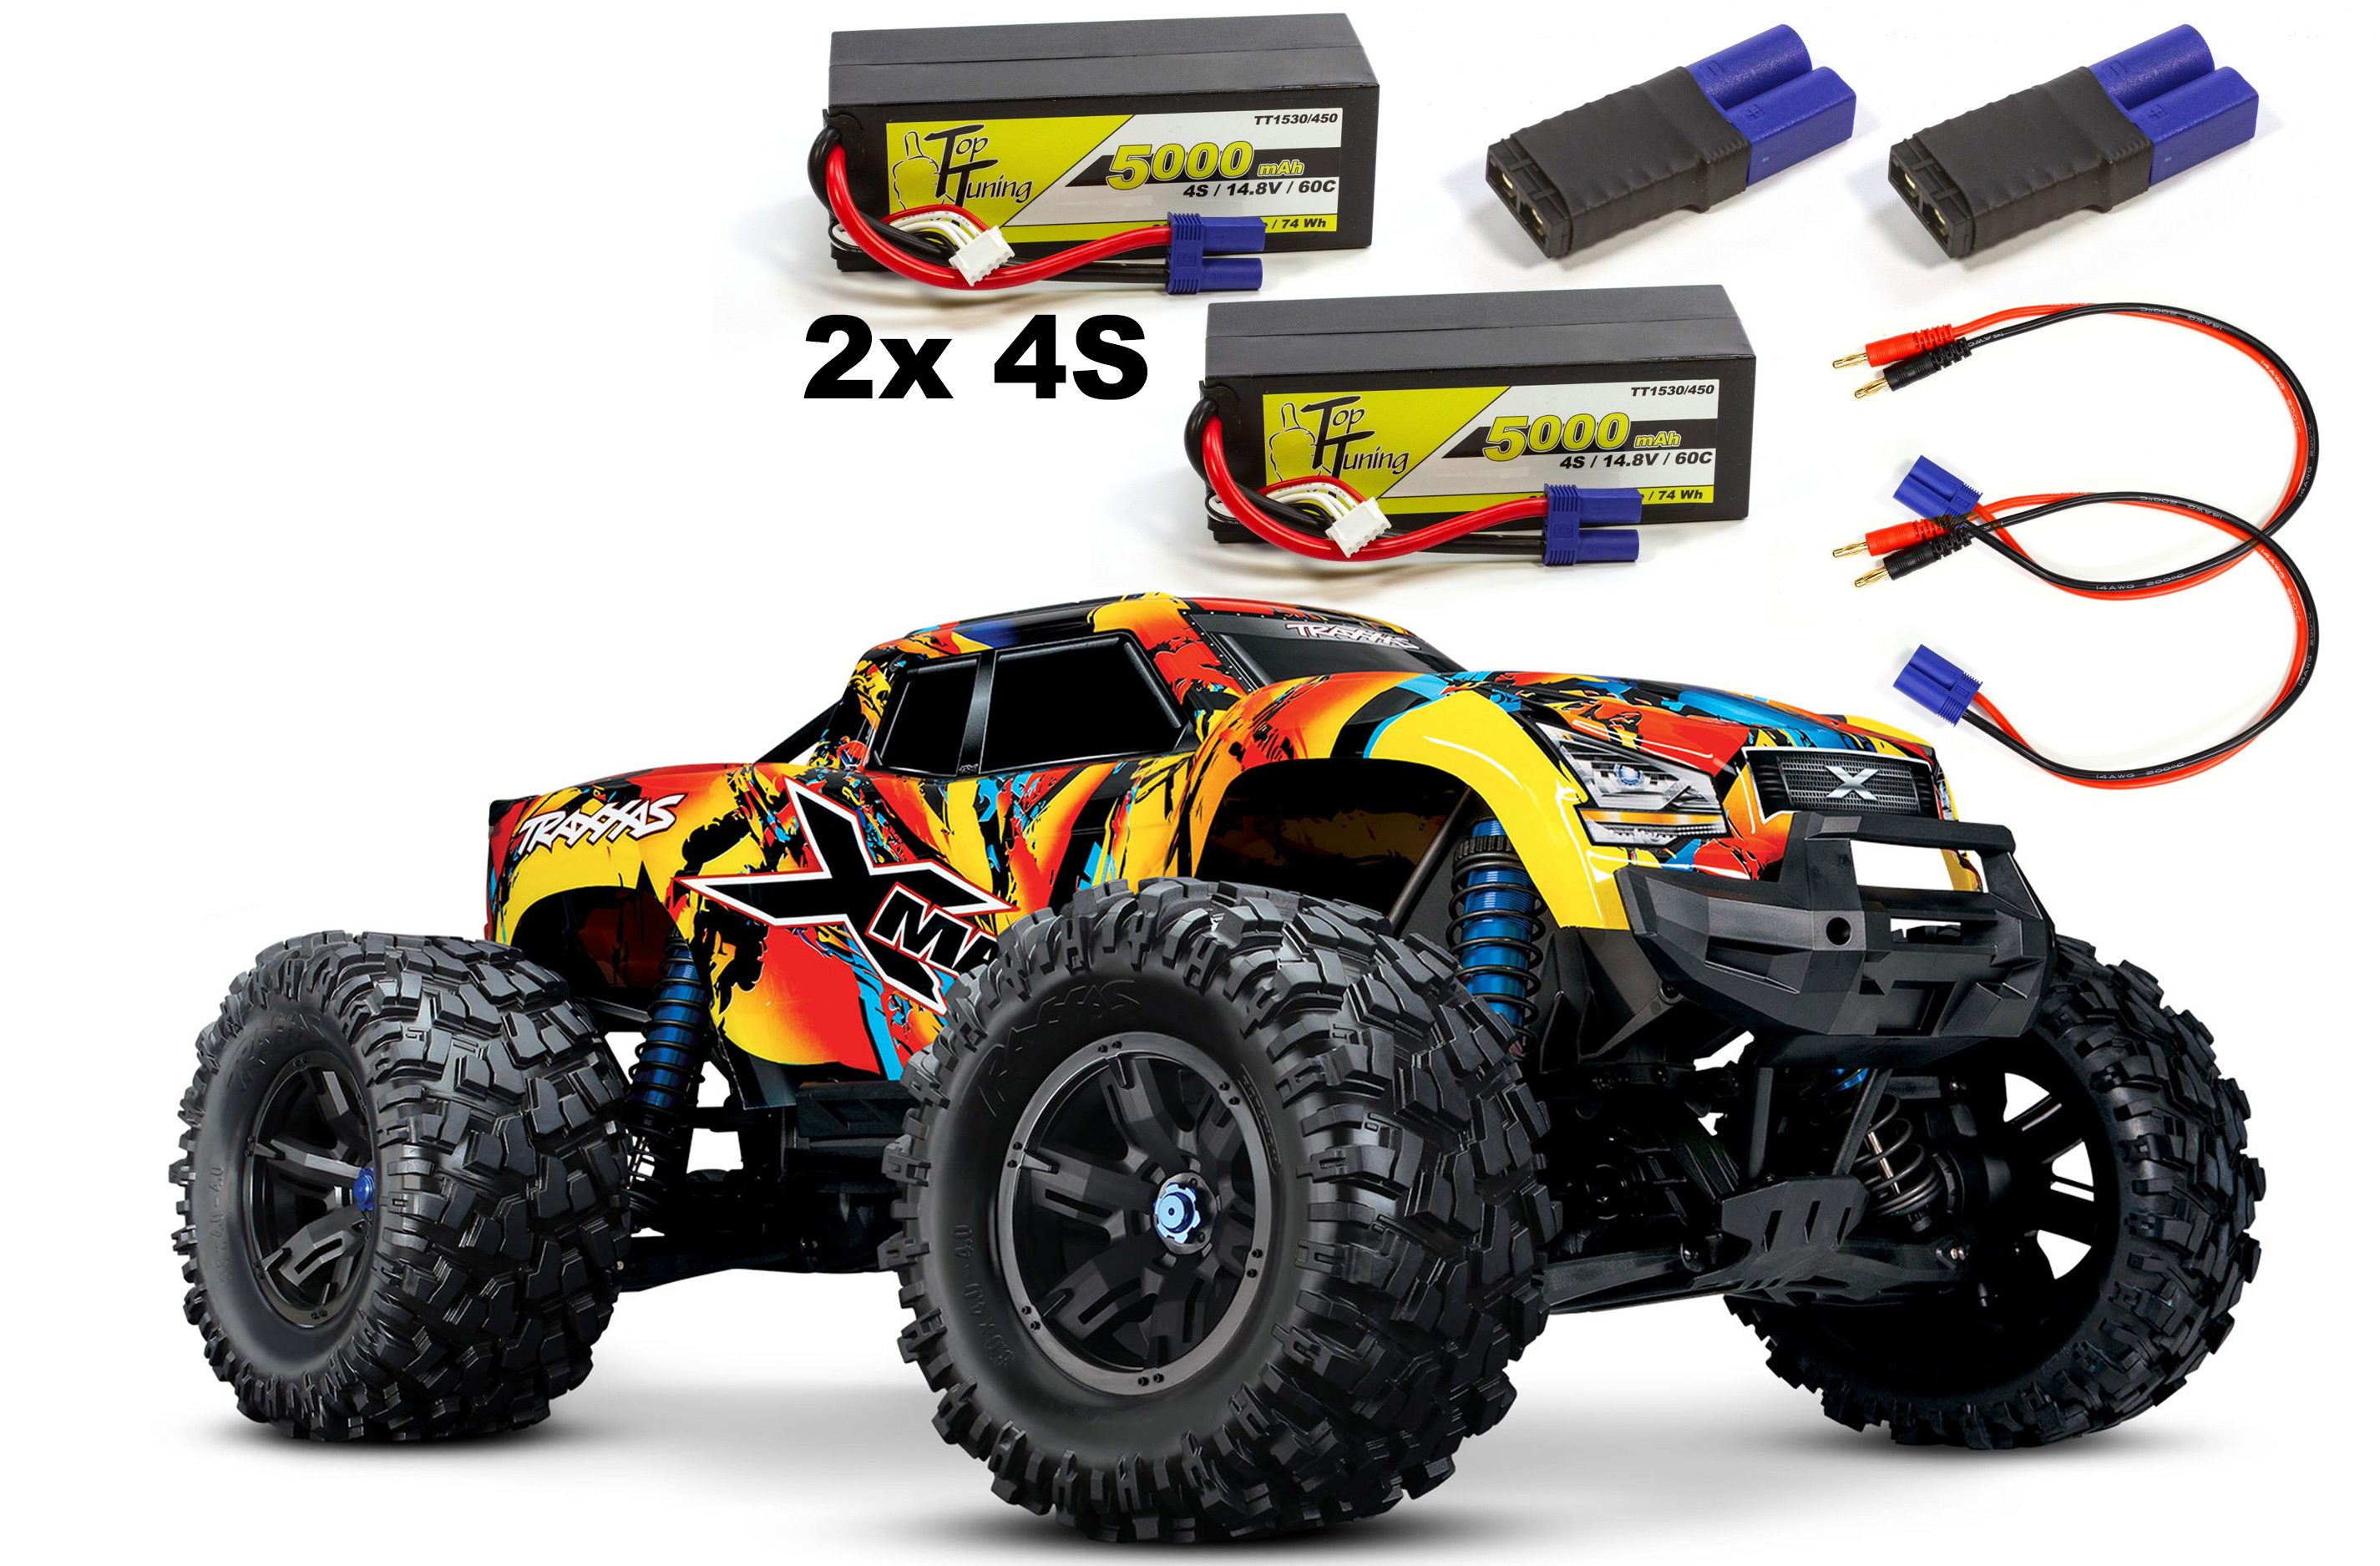 Traxxas X-MAXX 4x4 new 8S version RTR complete set with 2x 4S / 5000 mAh batteries Solar Flare